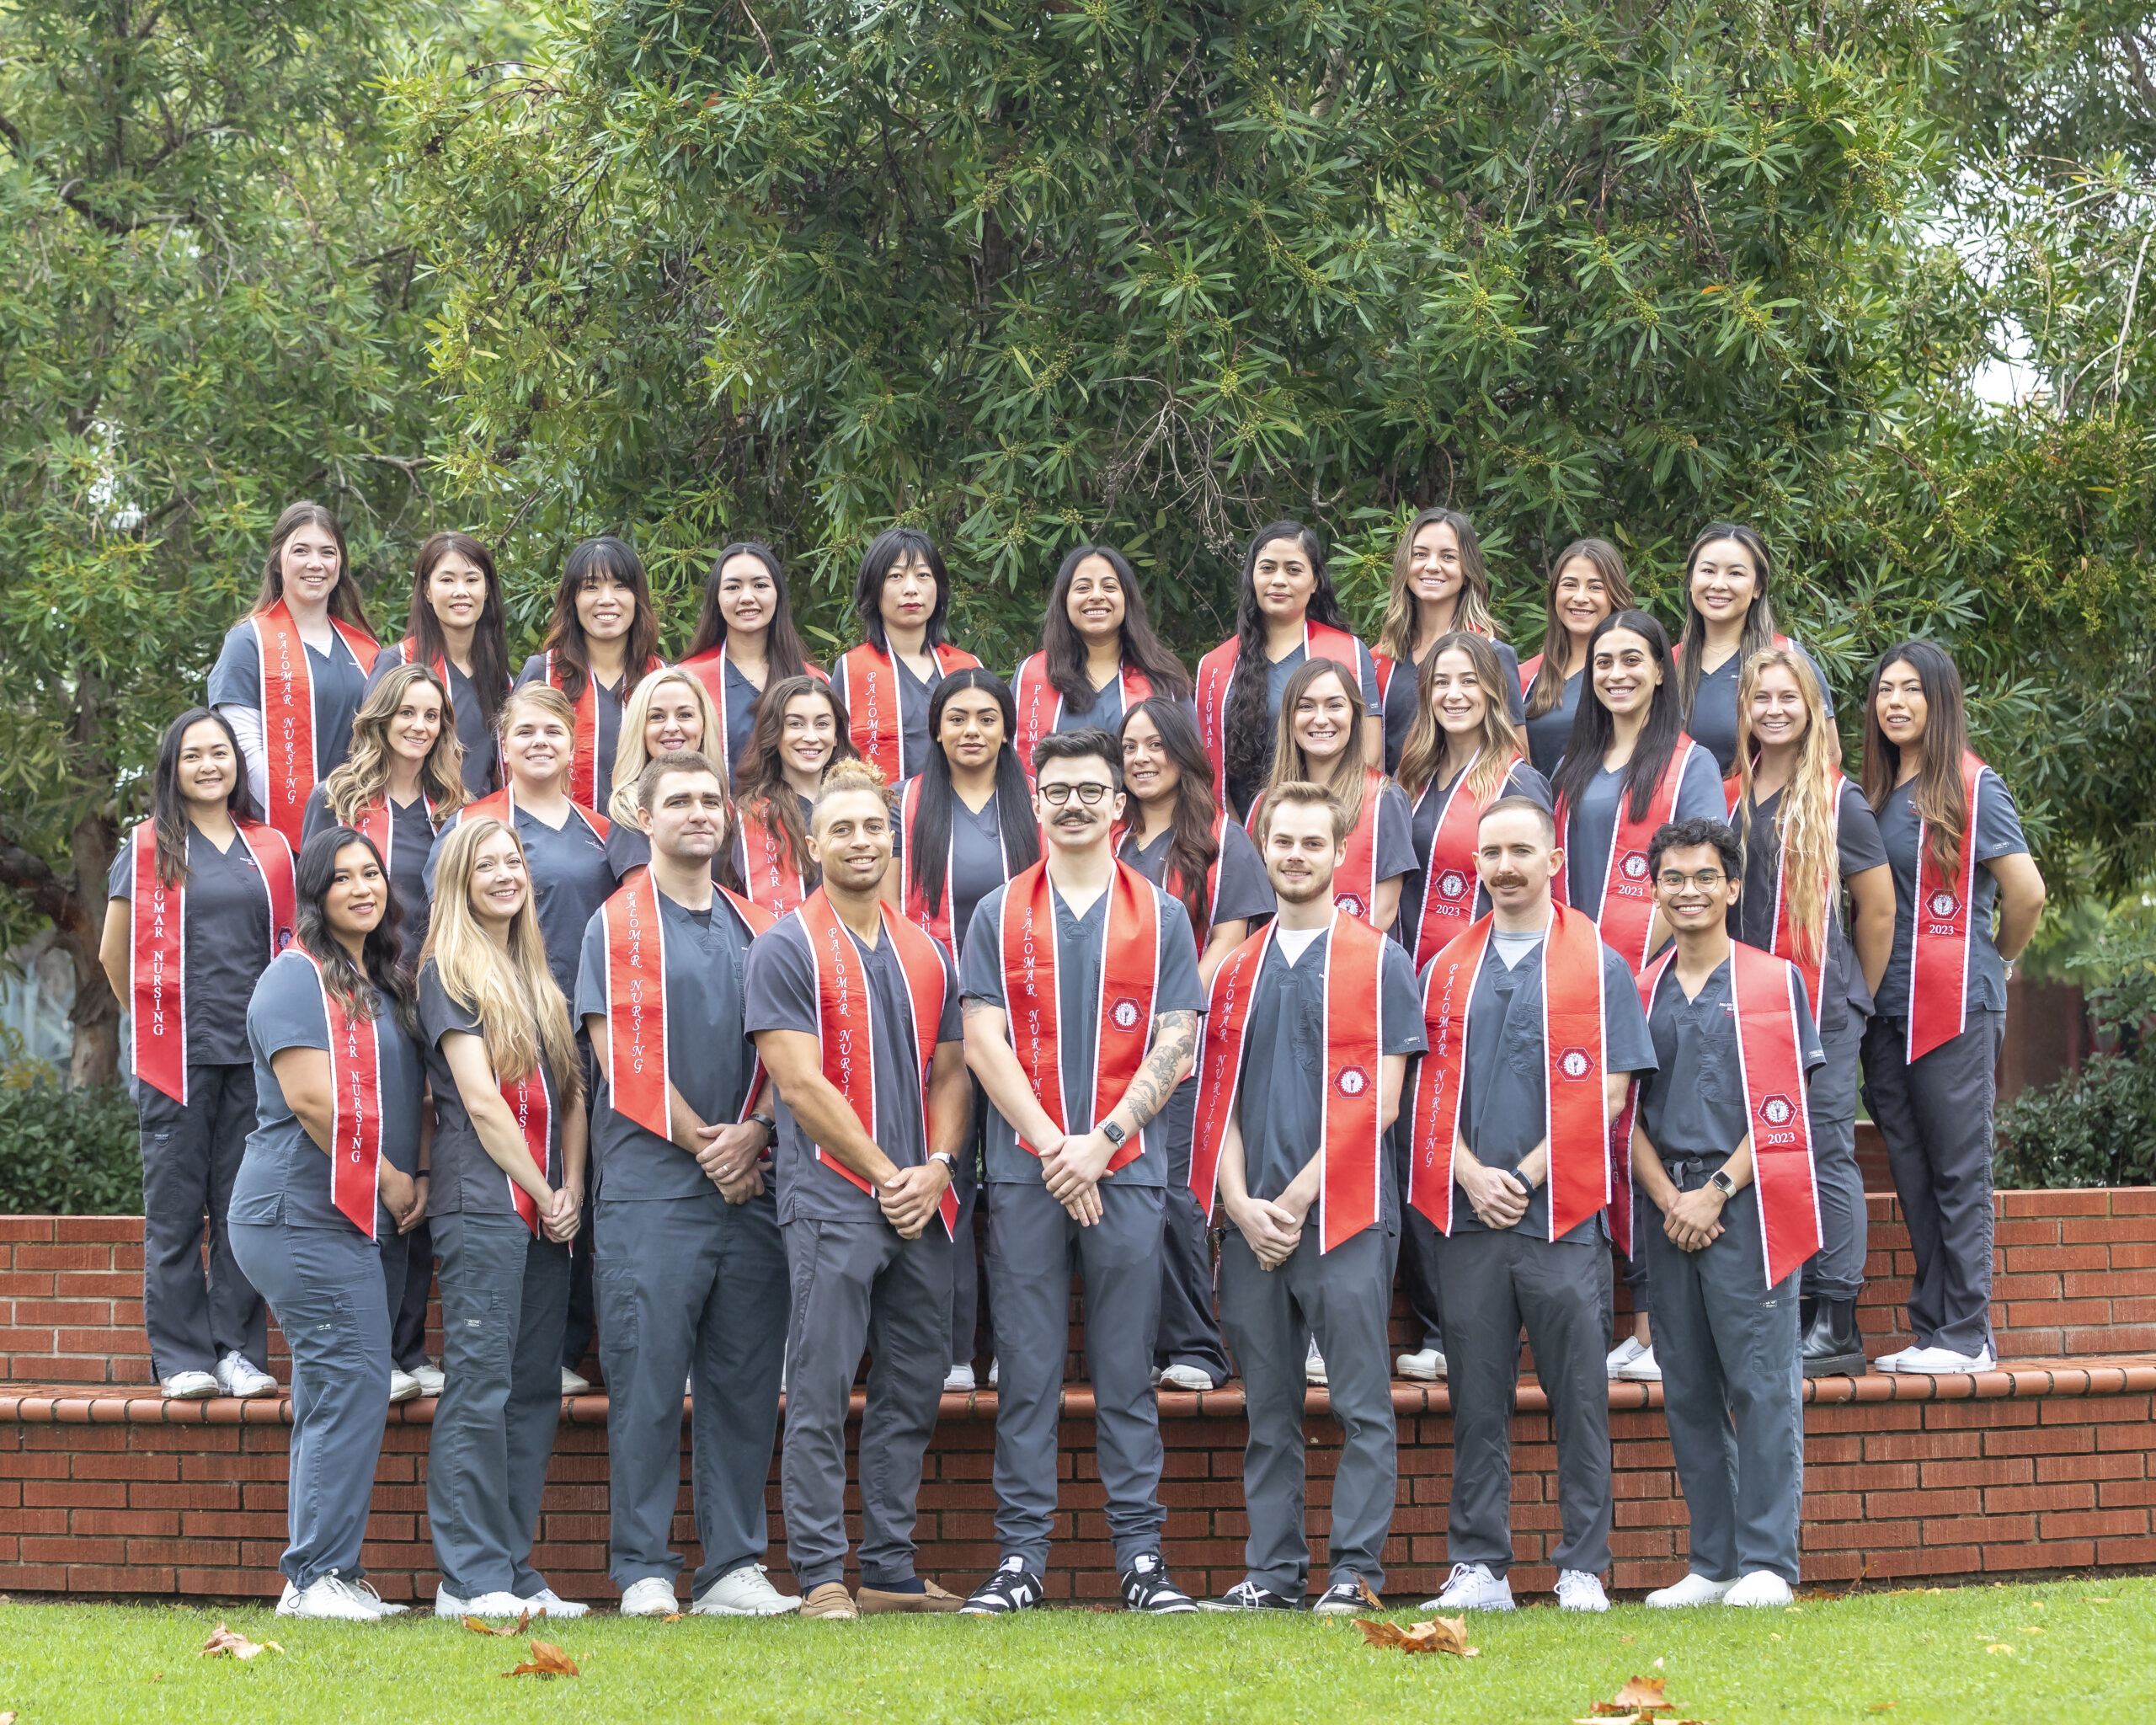 group photo of nursing students wearing scrubs and graduation stoles